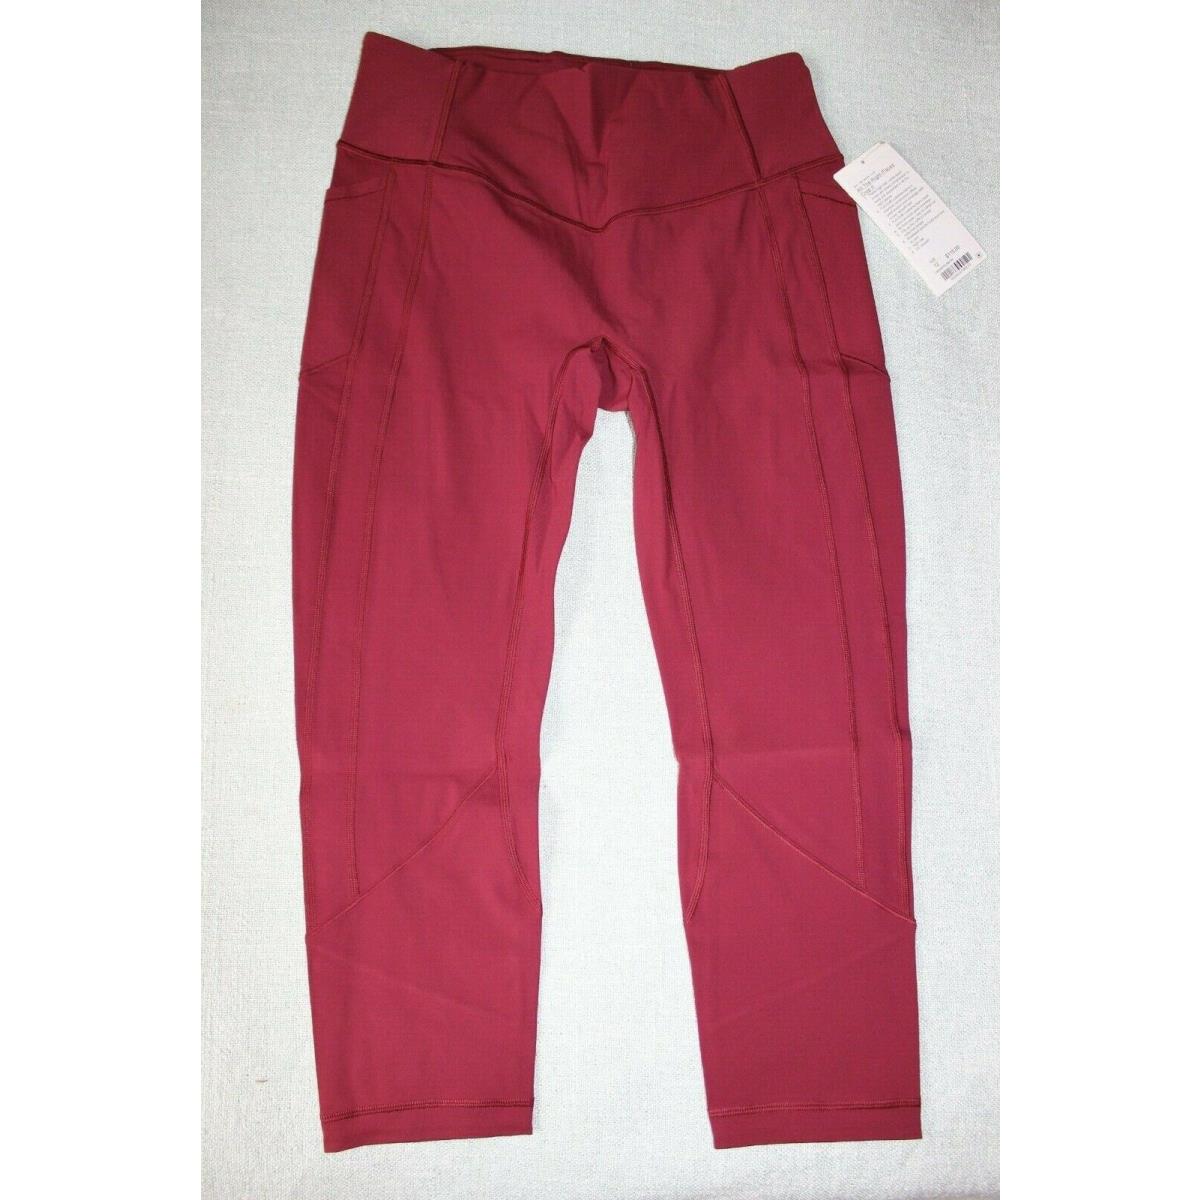 Lululemon All The Right Places Crop II 23`` Size 12 Ruby Wine